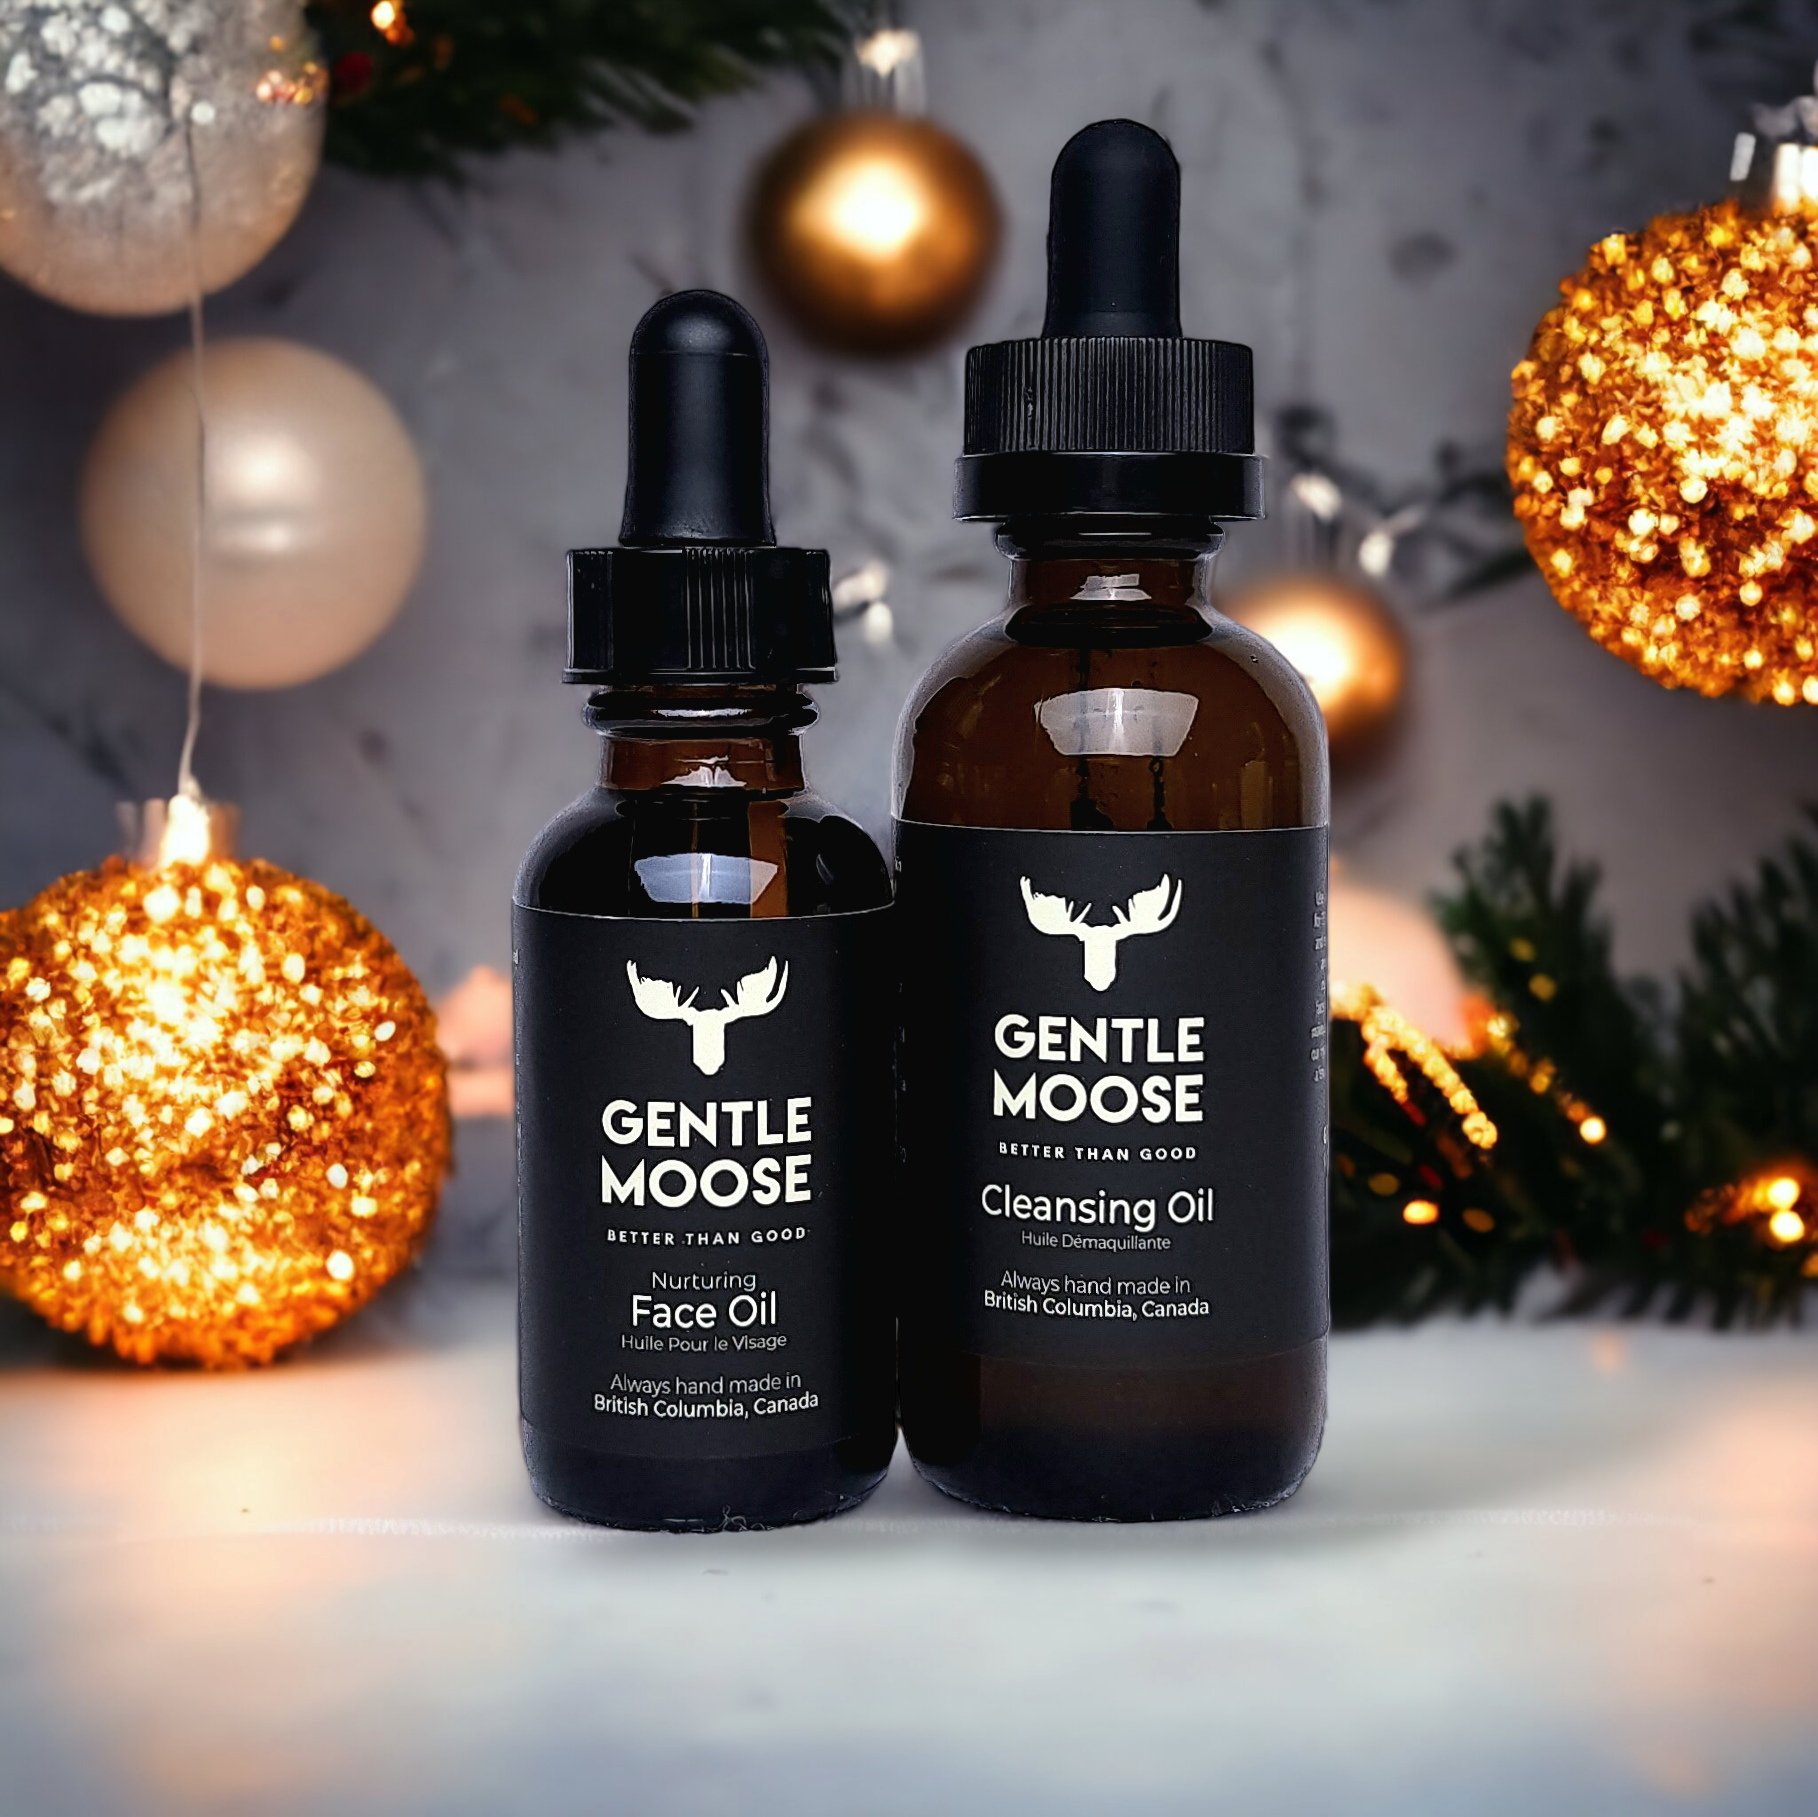 Gentle Moose Skincare Natural Face Oil and Cleansing Oil